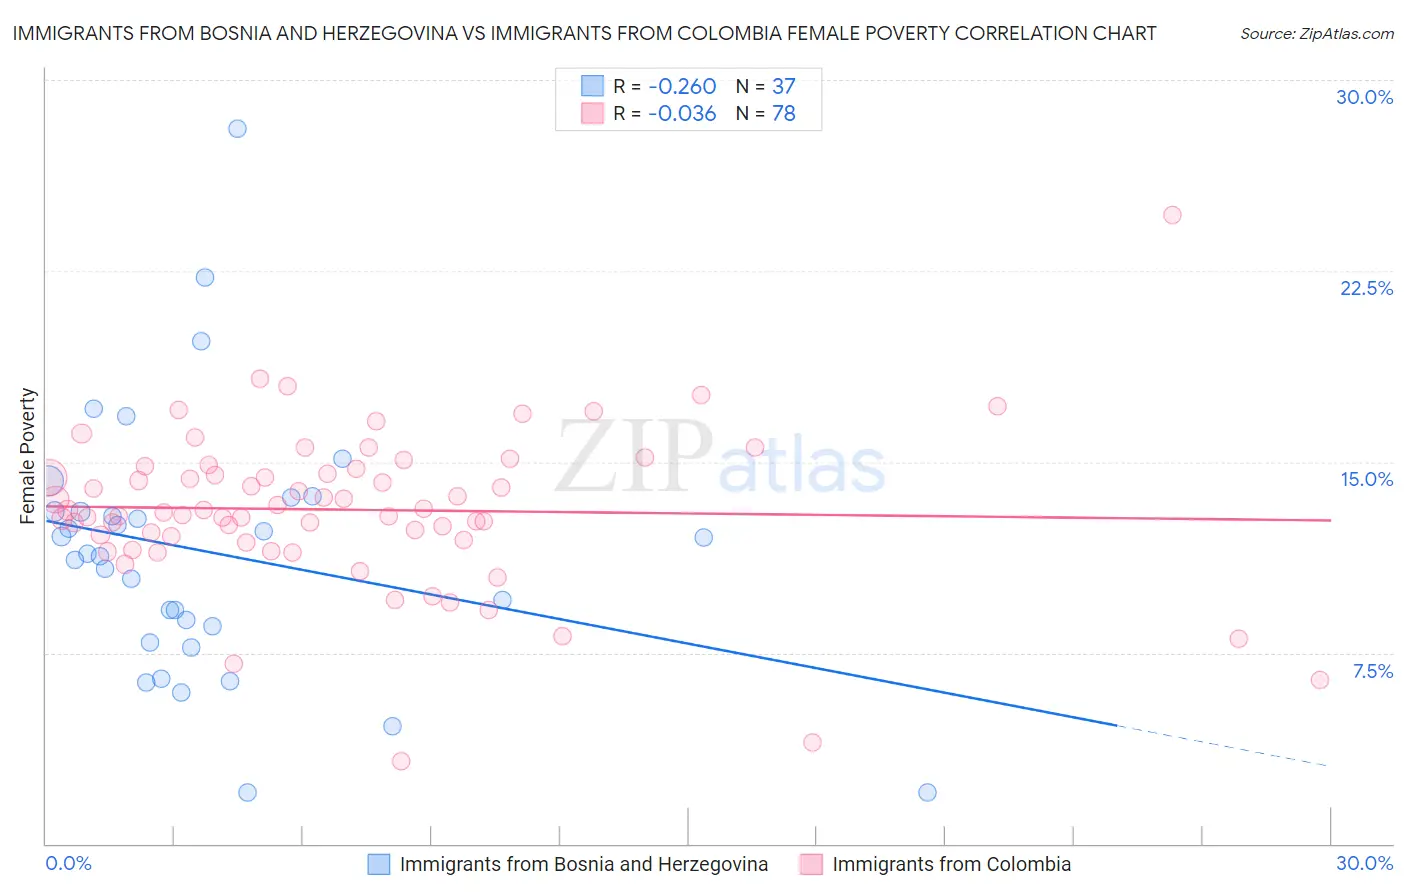 Immigrants from Bosnia and Herzegovina vs Immigrants from Colombia Female Poverty